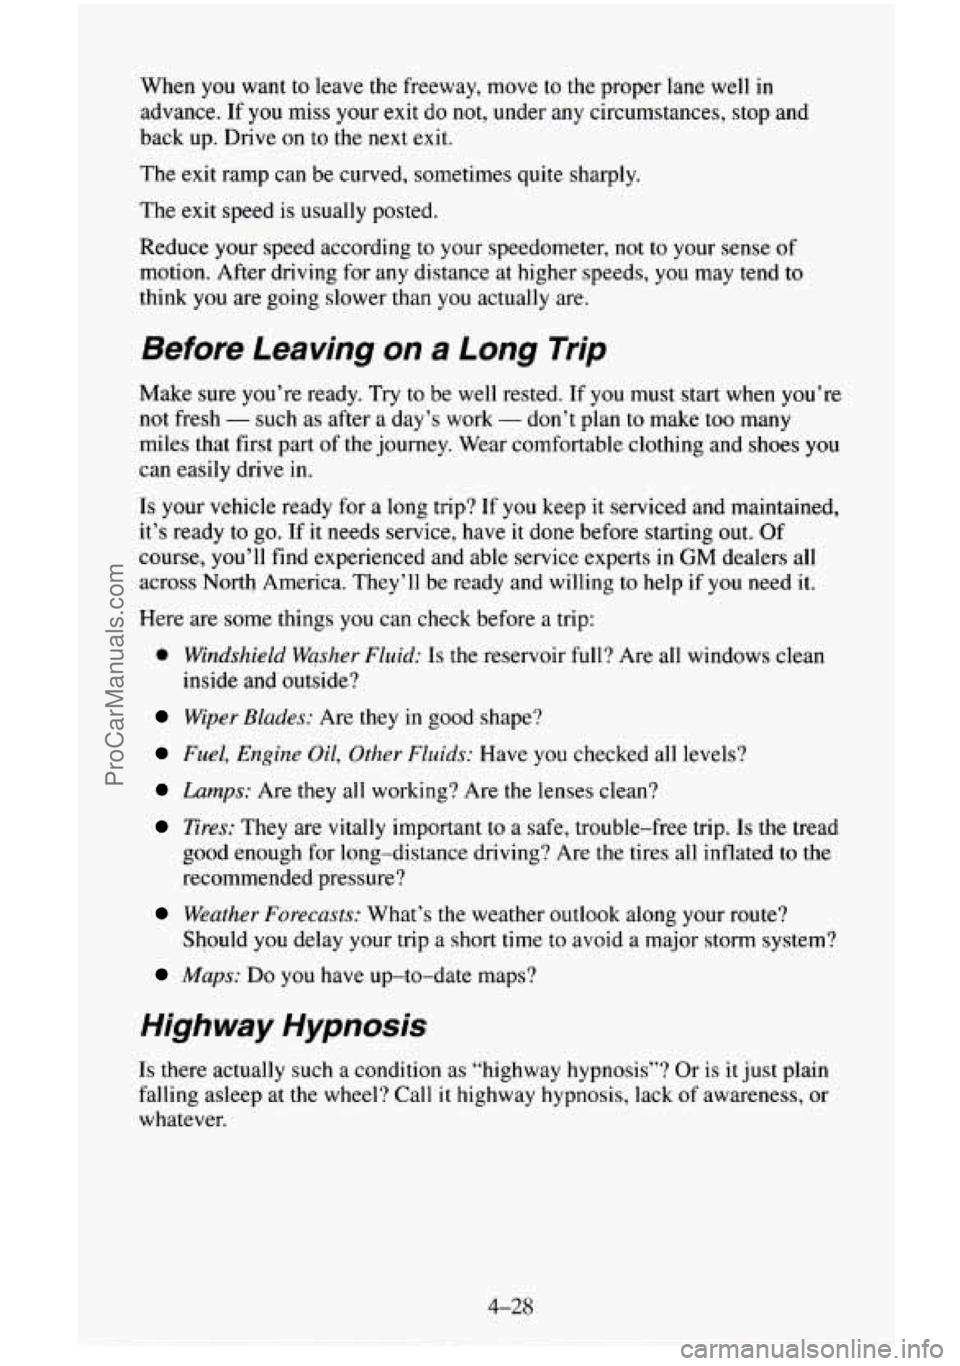 CHEVROLET SUBURBAN 1995  Owners Manual When you  want  to  leave the freeway, move  to  the proper lane well in 
advance. If you miss your exit do not,  under any circumstances,  stop and 
back  up.  Drive on  to the next exit. 
The  exit 